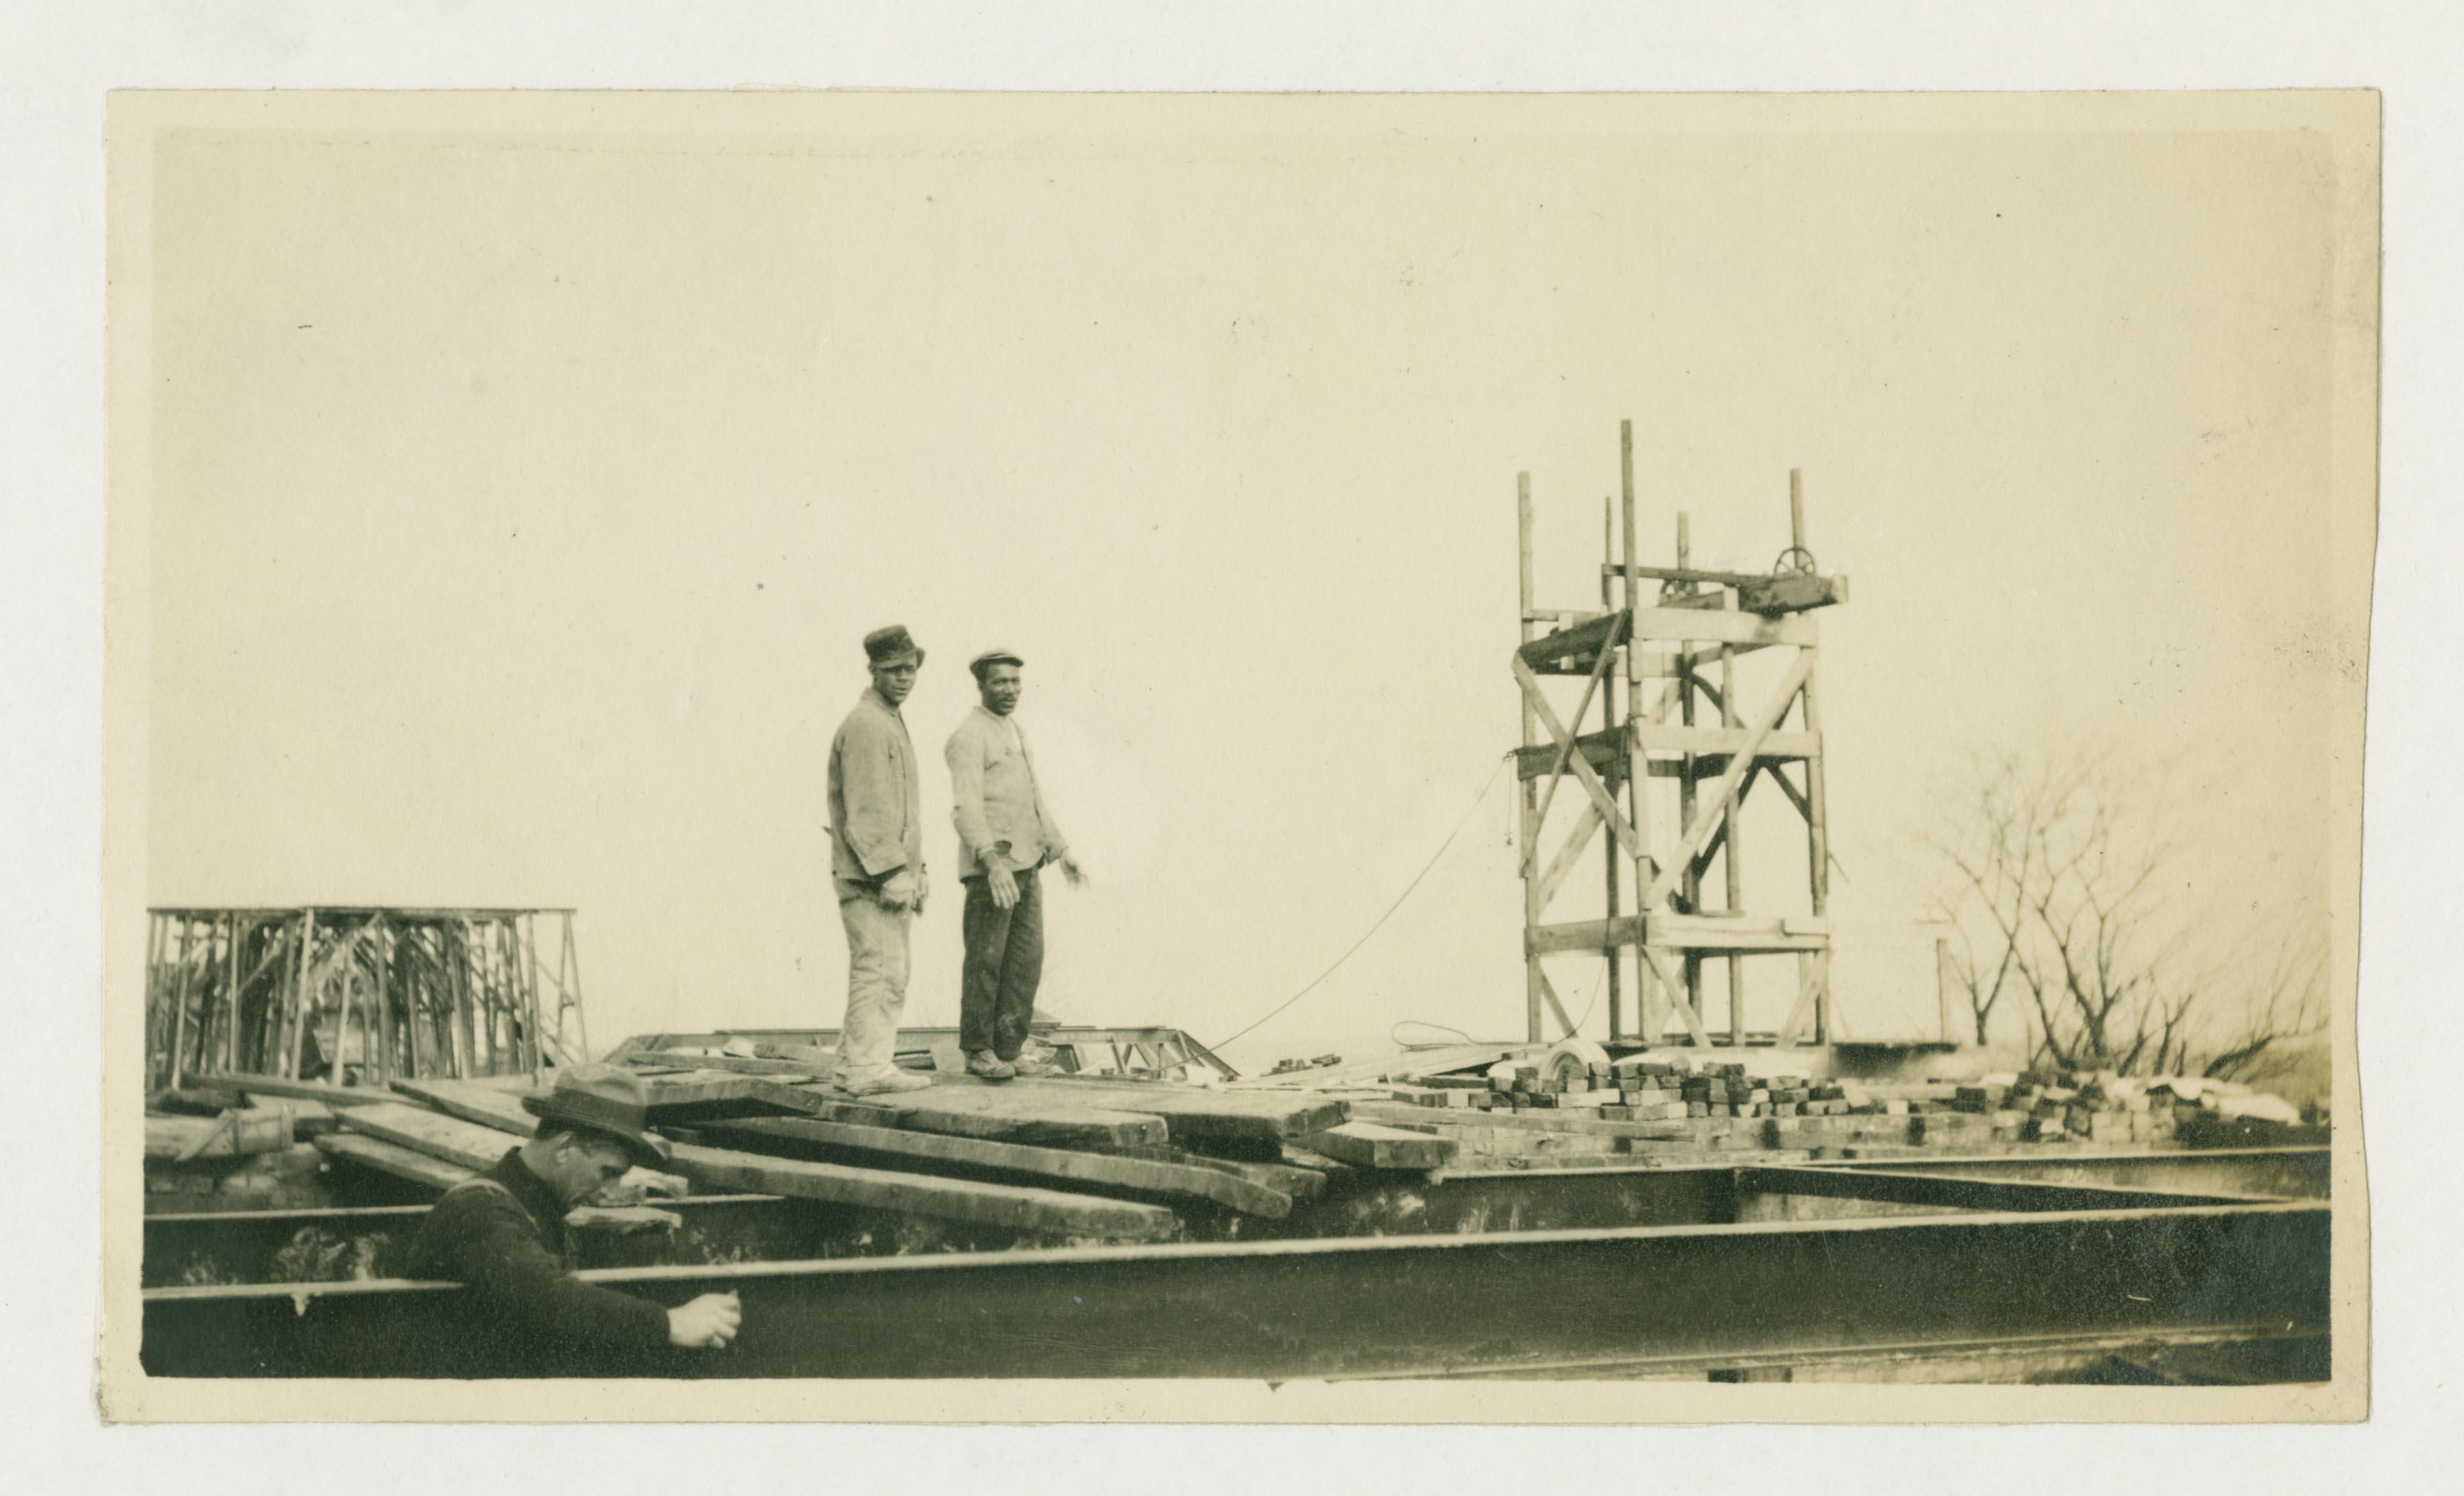 Calvert Hall under construction with two black men pictured.